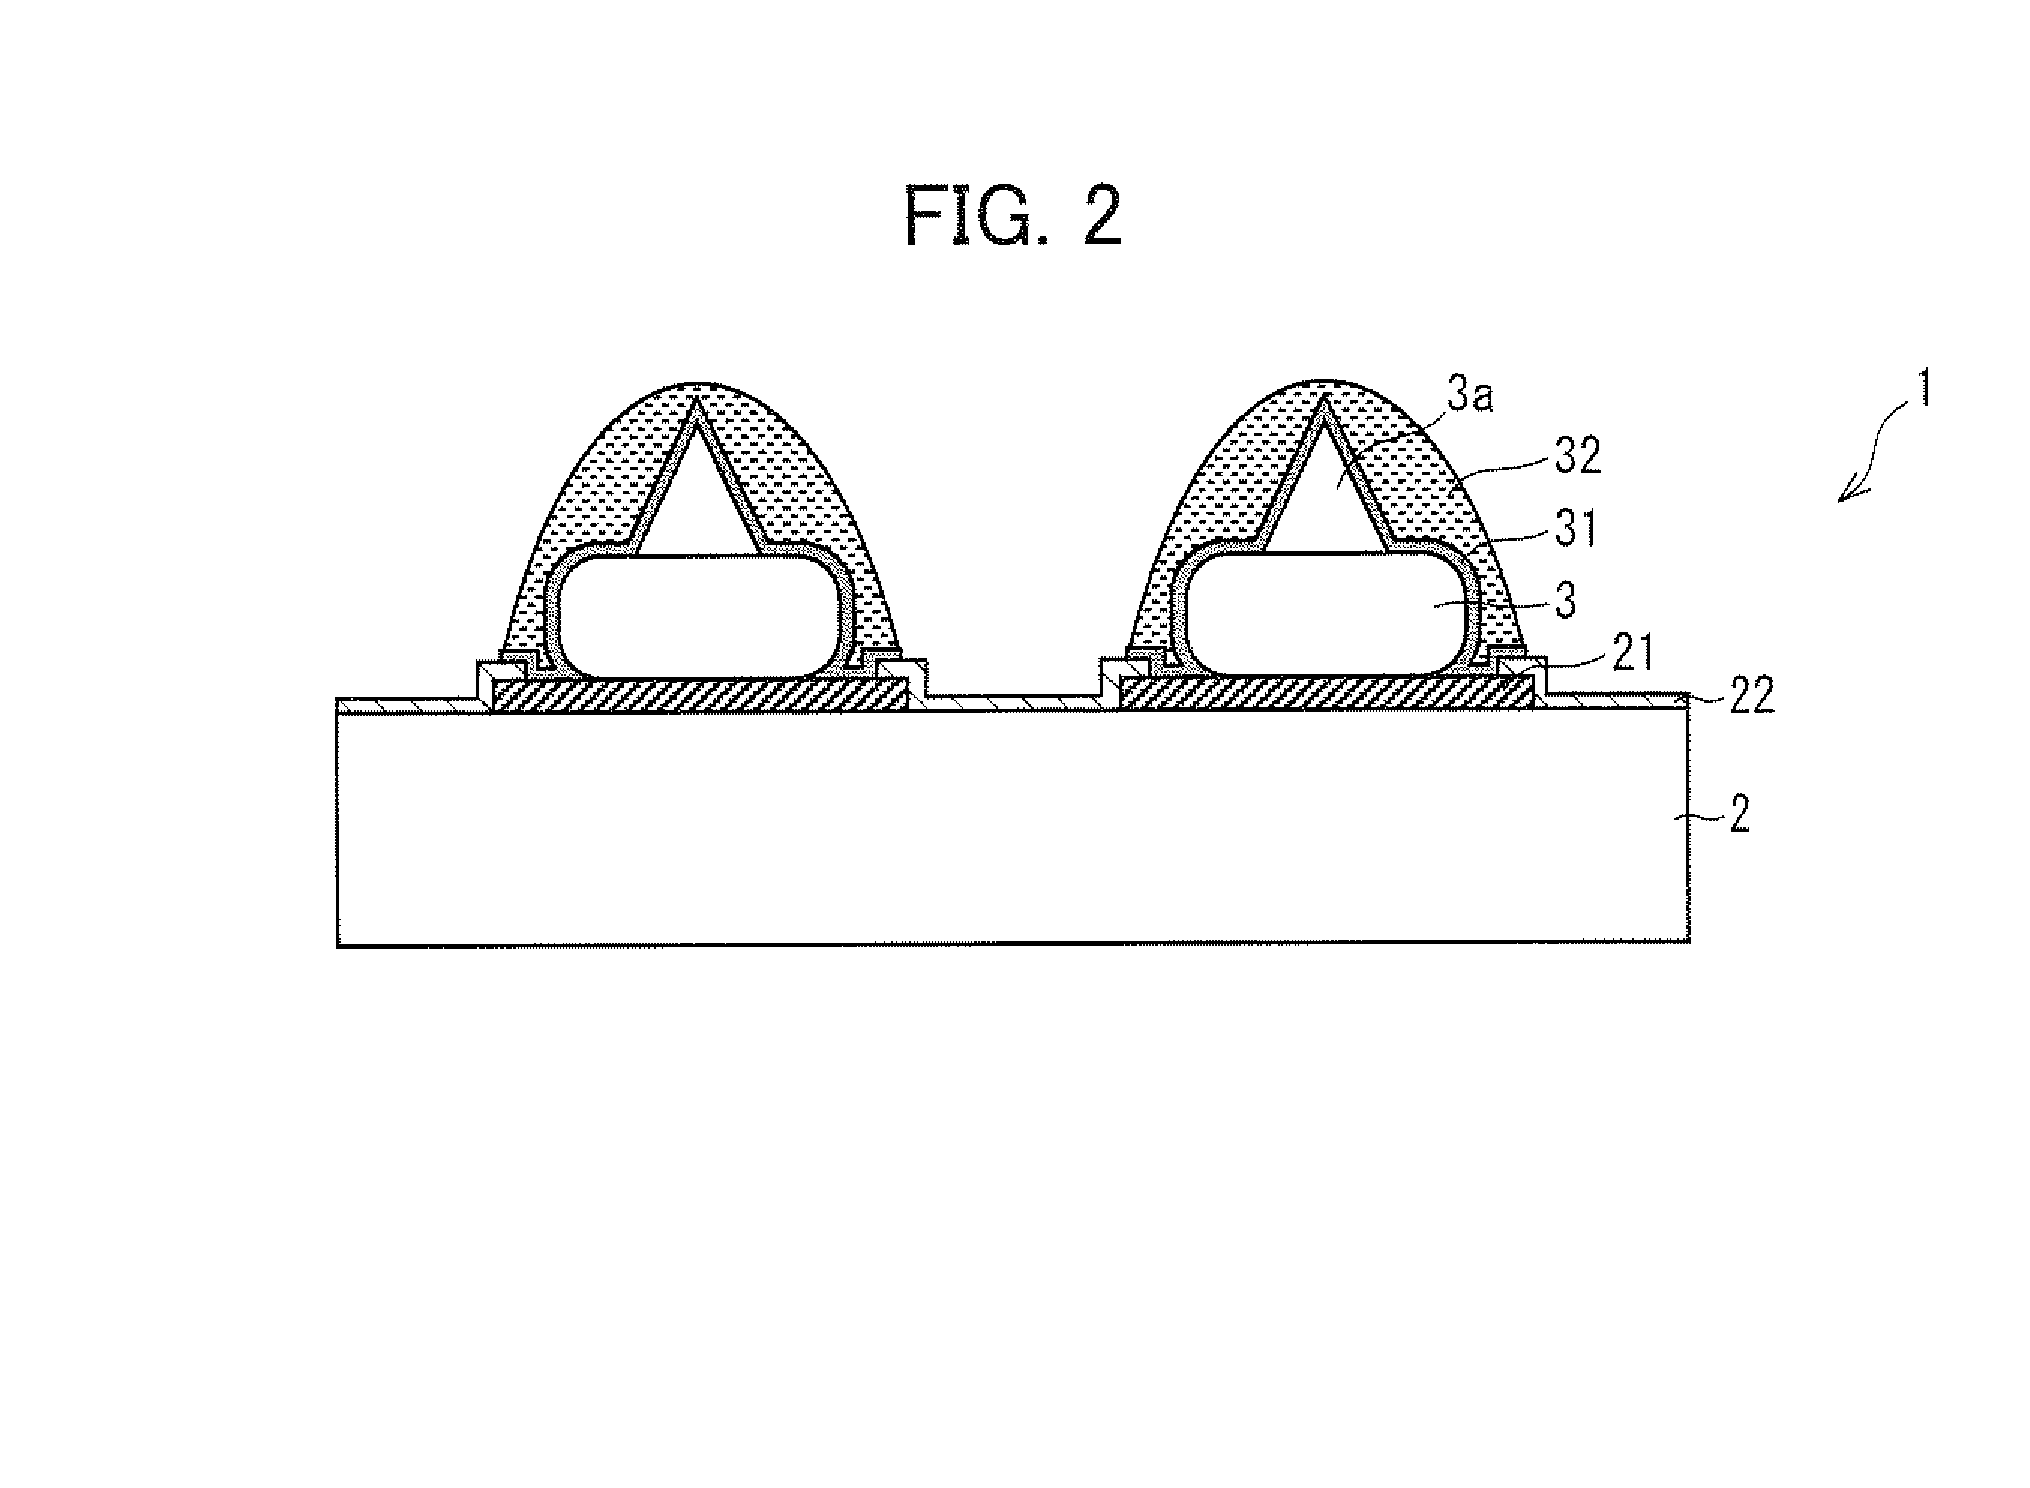 Semiconductor device, method for mounting semiconductor device, and mounting structure of semiconductor device